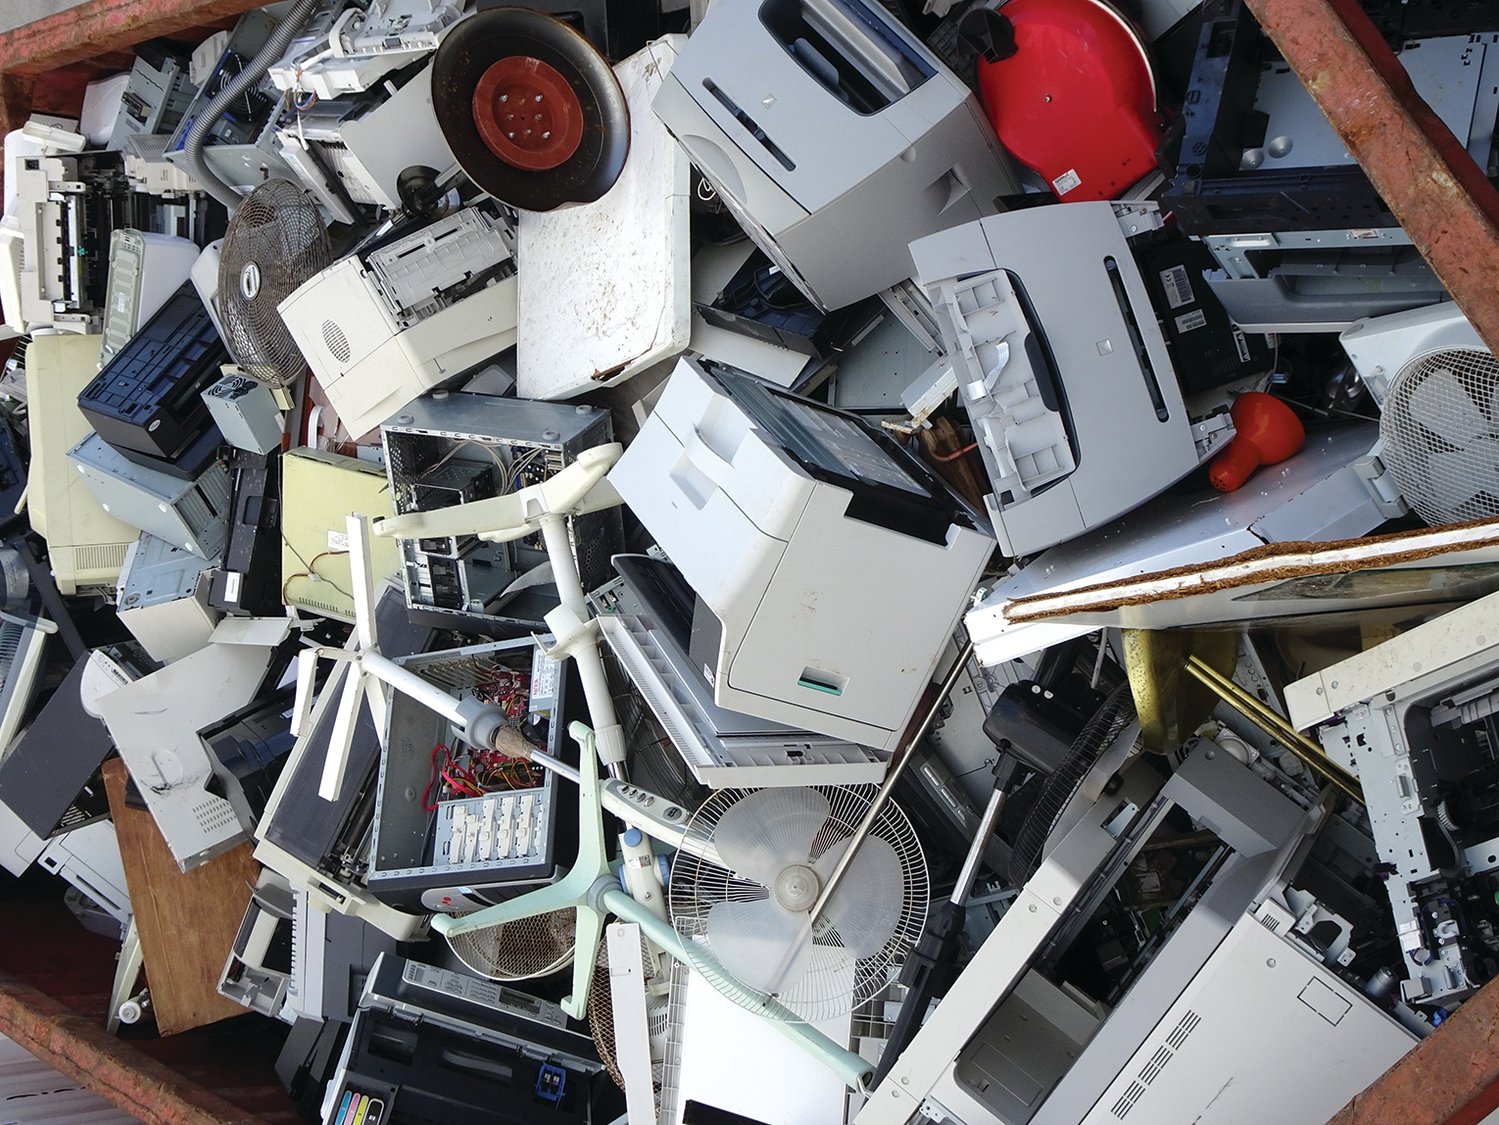 The state Department of Environmental Conservation and the Oneida County Sewer District to hold an electronics recycling event on Saturday, Oct. 22.